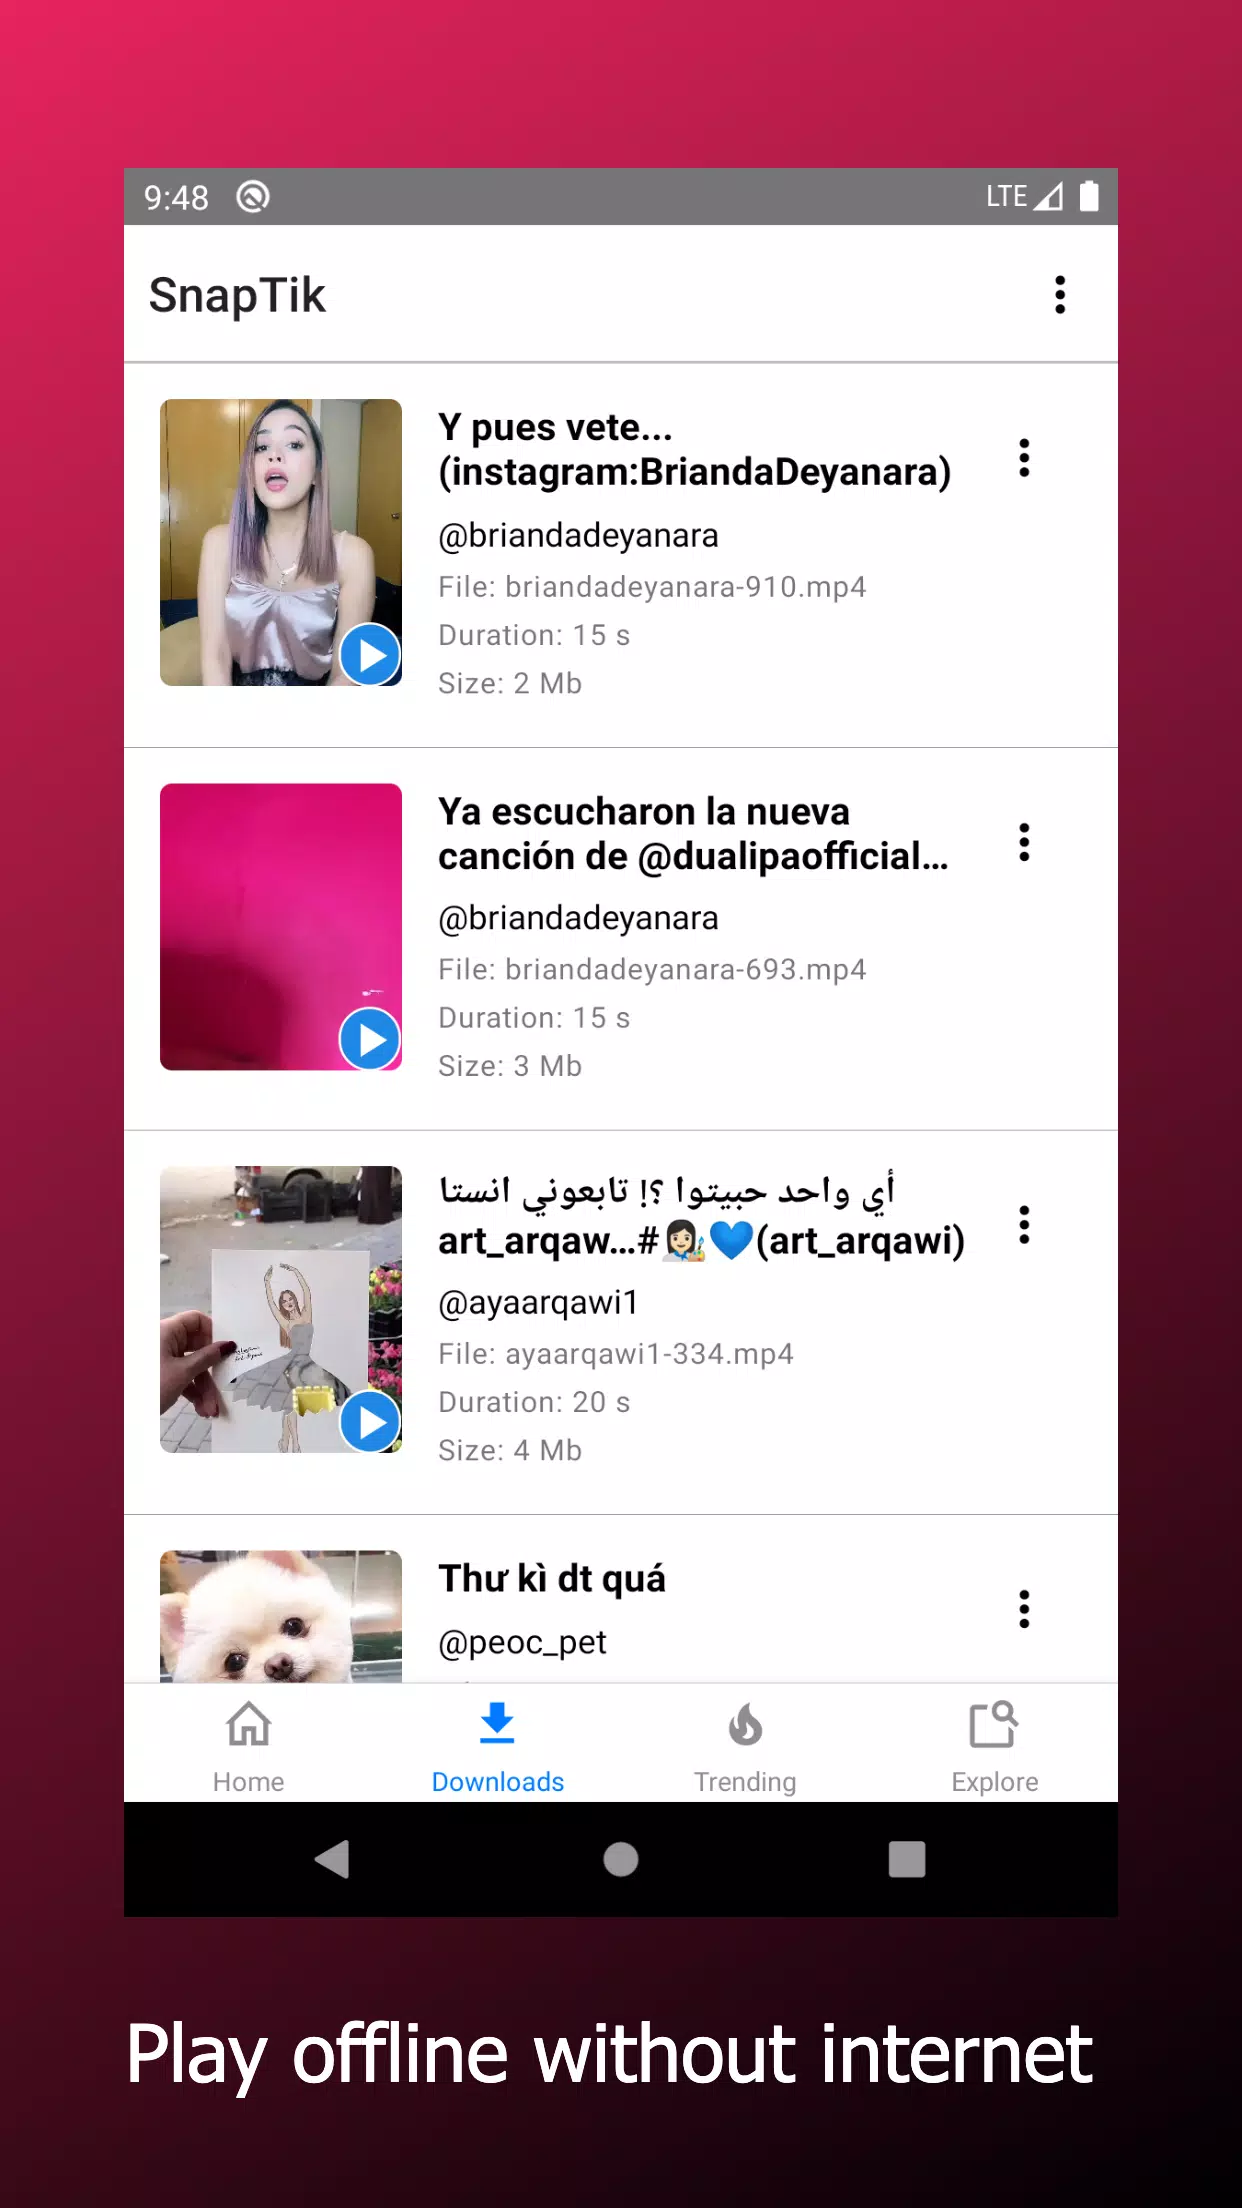 SnapDouyin - Douyin video downloader - China Tiktok video download without  watermark